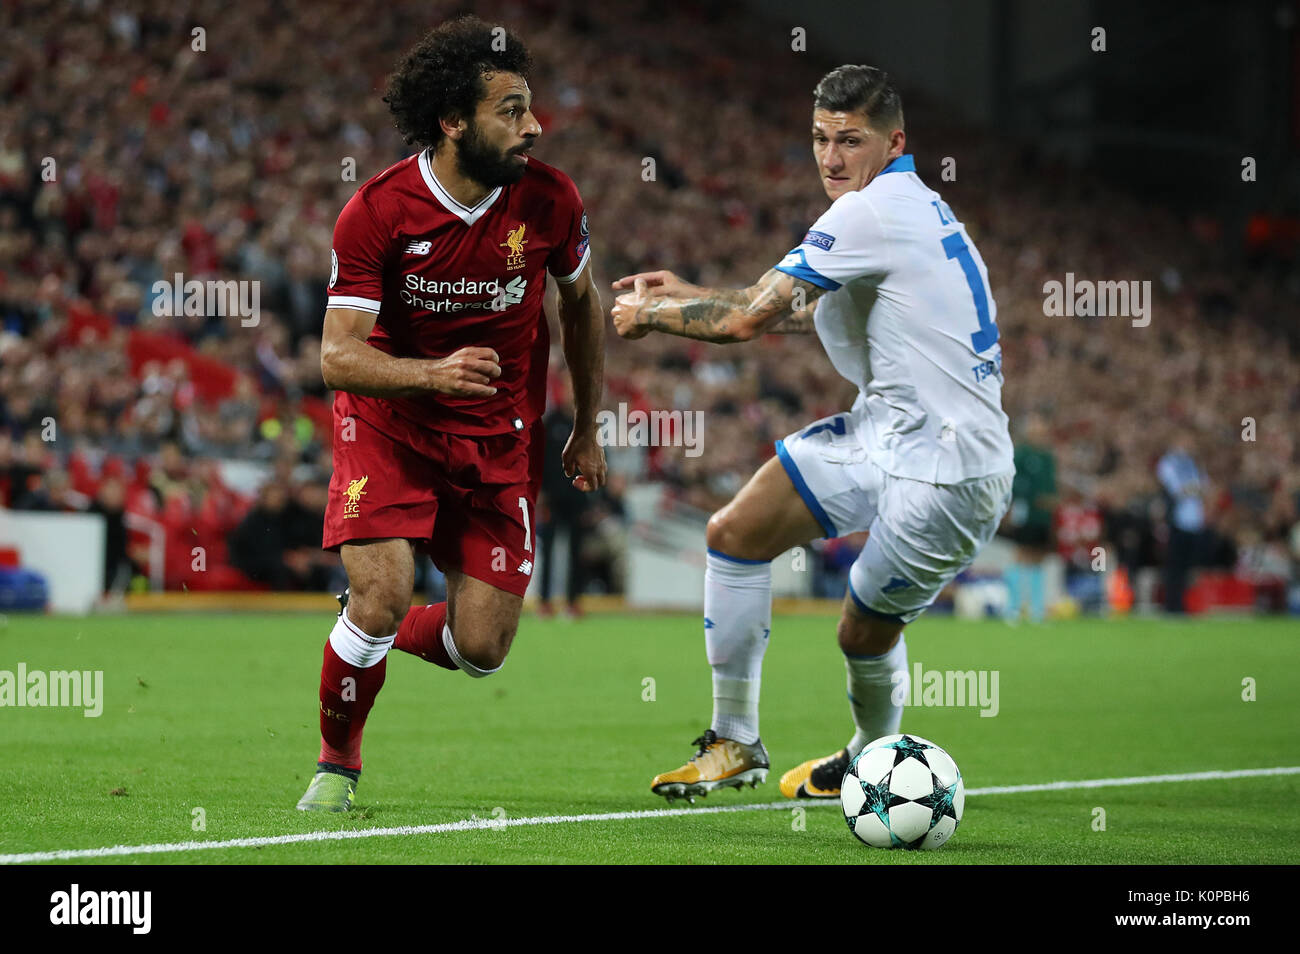 Liverpool's Mohamed Salah (left) and Hoffenheim's Steven Zuber in action during the UEFA Champions League Play-Off, Second Leg match at Anfield, Liverpool. Stock Photo